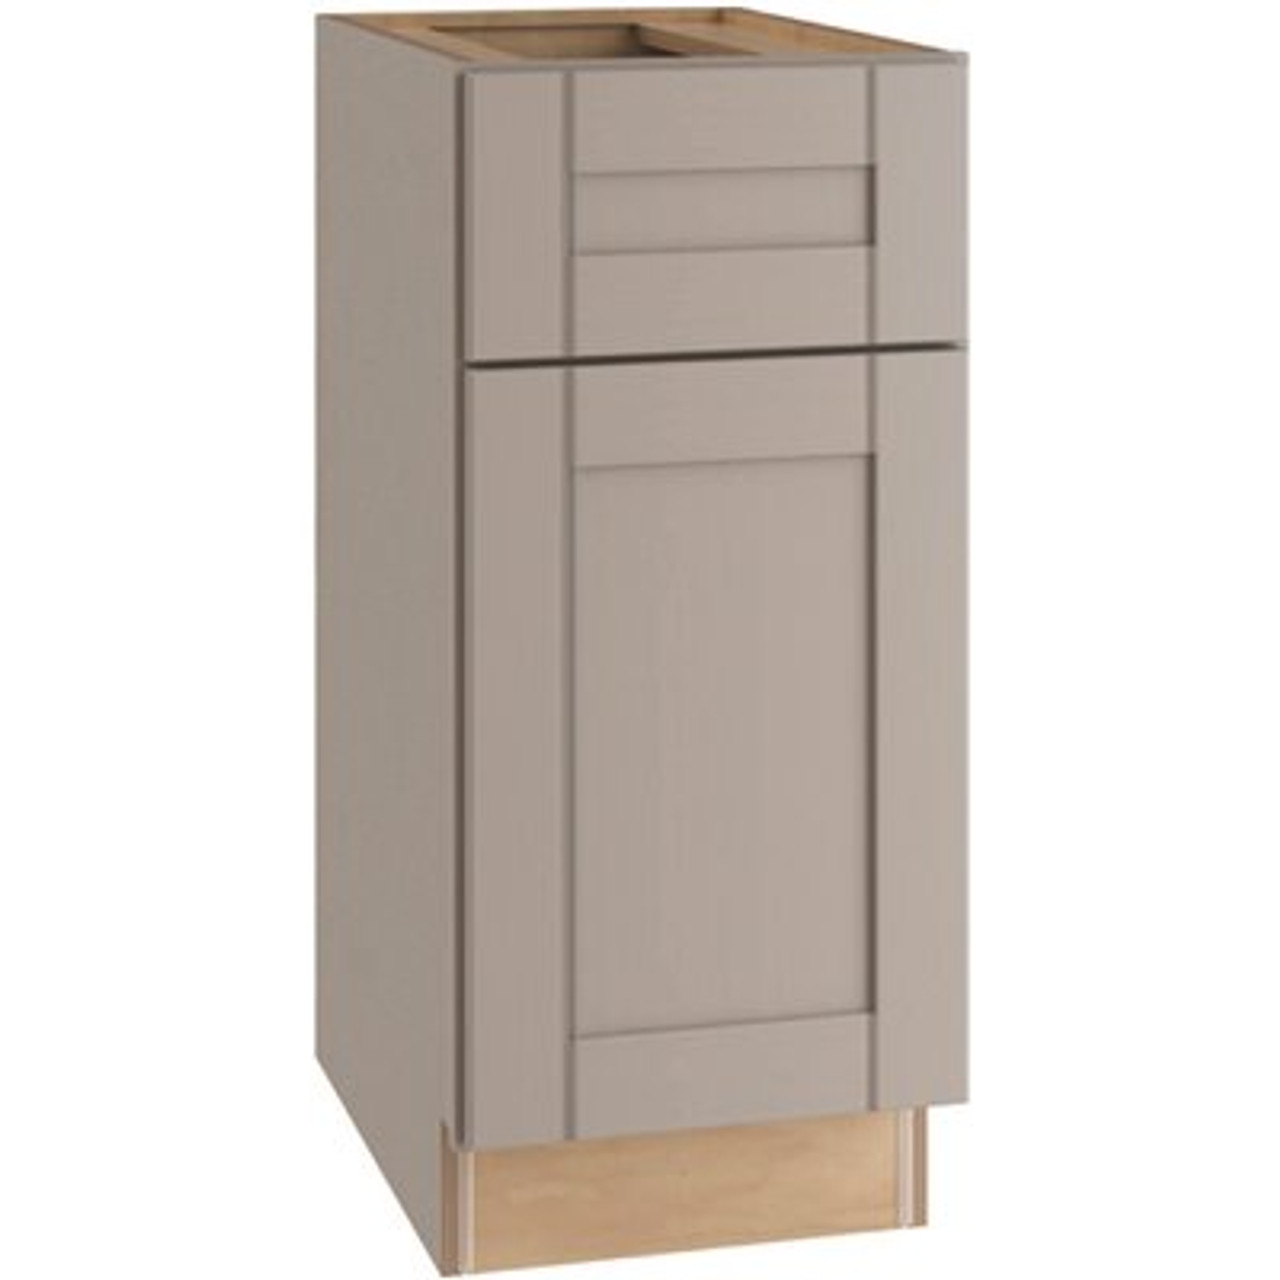 Arlington Veiled Gray Shaker Assembled Plywood Base Kitchen Cabinet With Soft Close 12 In. X 34.5 In. X 24 In.